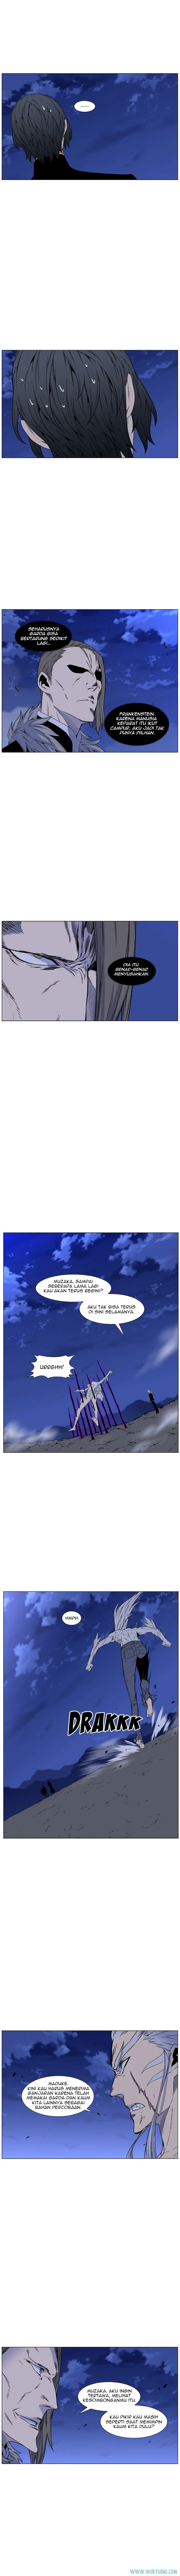 Noblesse Chapter 463 - 69